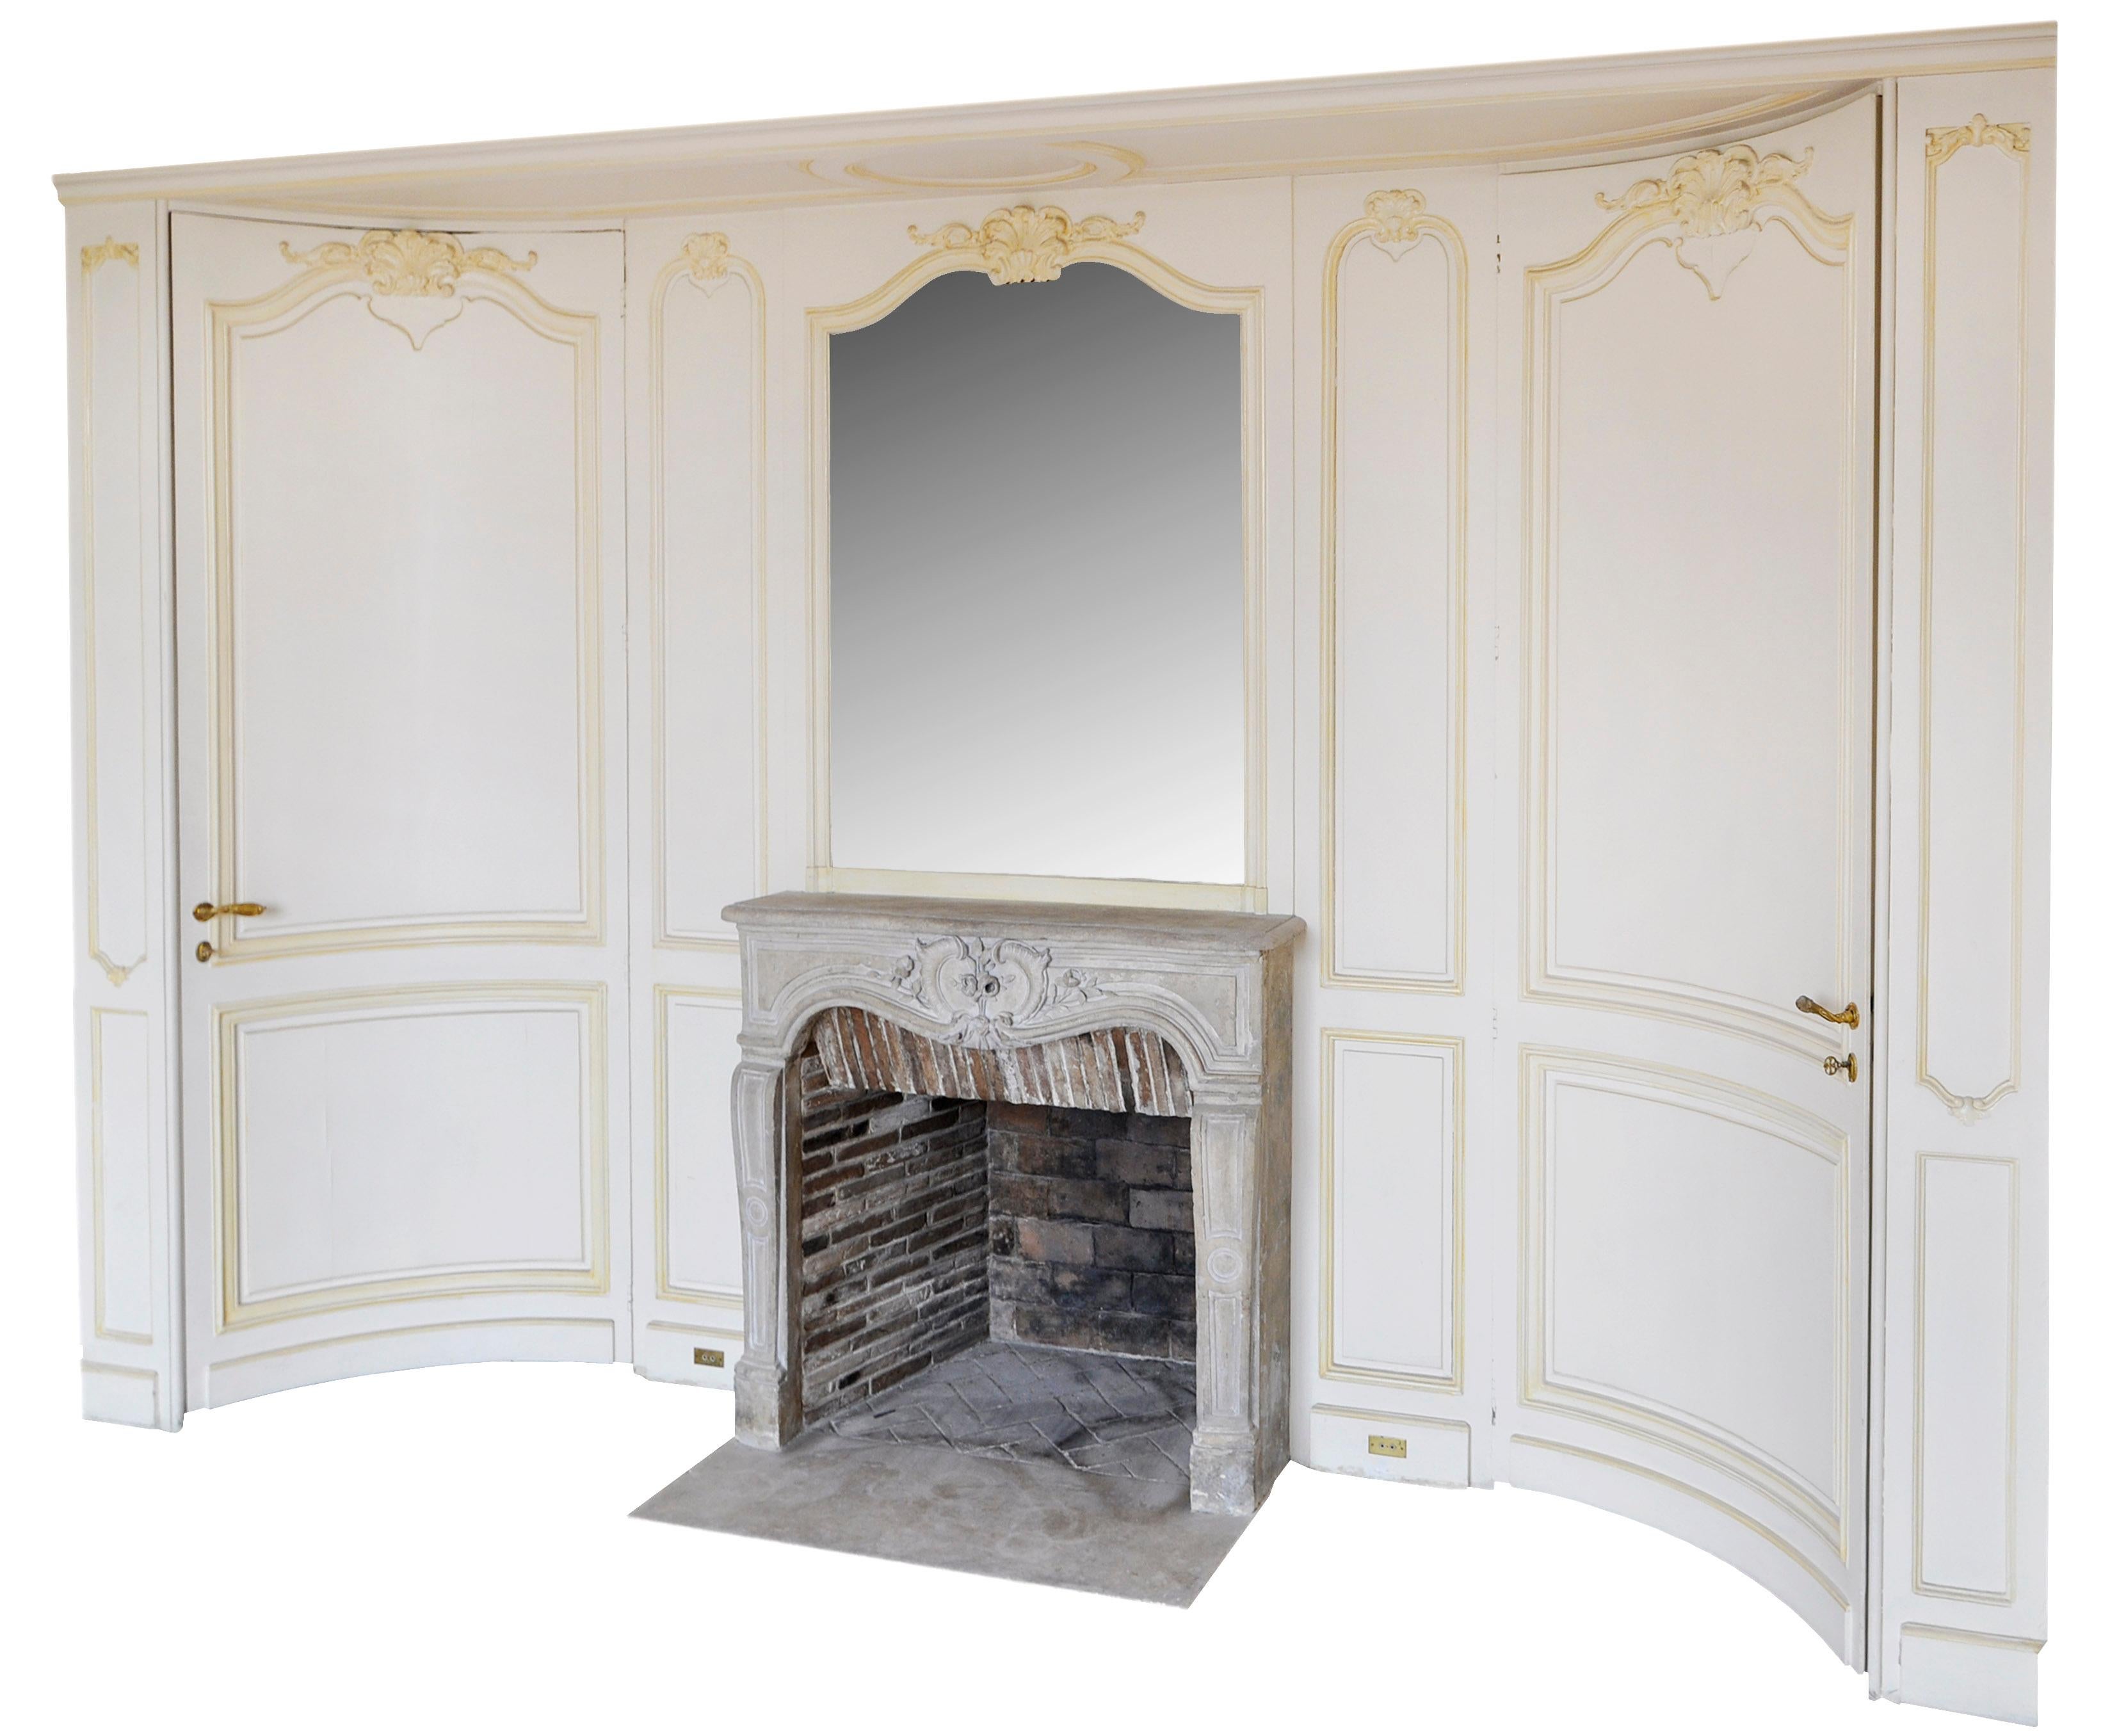 This Louis XV style paneled room was made in the early 20th century. The Louis XV era stone fireplace was made in the 18th century. The woodwork may be likened to the work of Jansen.

The paneled room was made out of carved wood. The fireplace comes